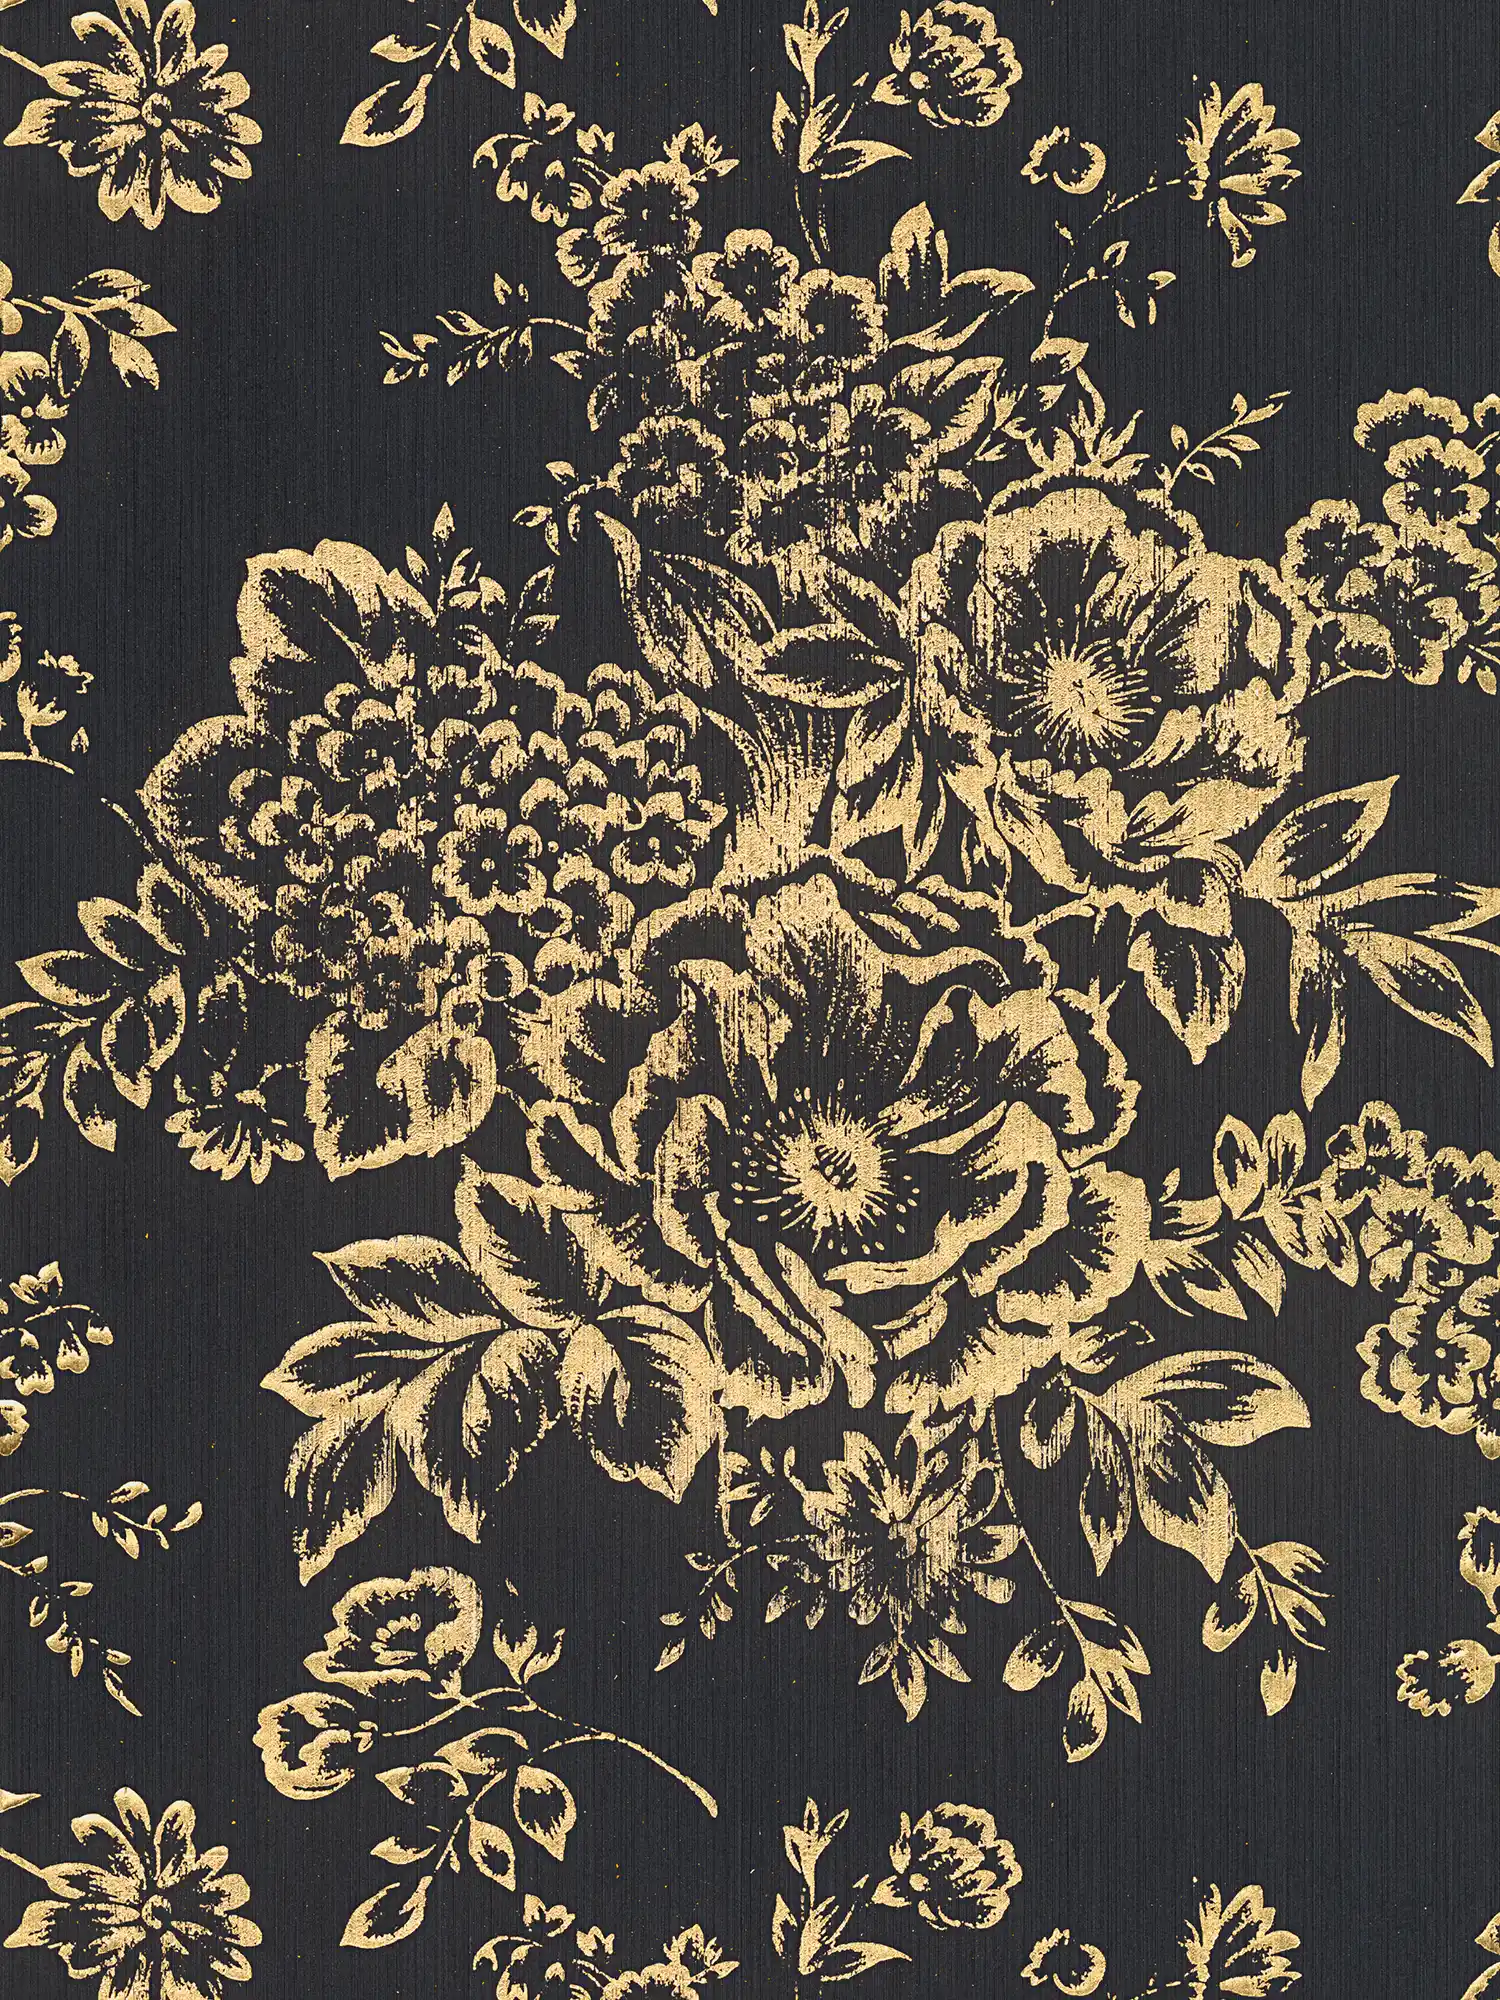 Textured wallpaper with golden floral pattern - gold, black
